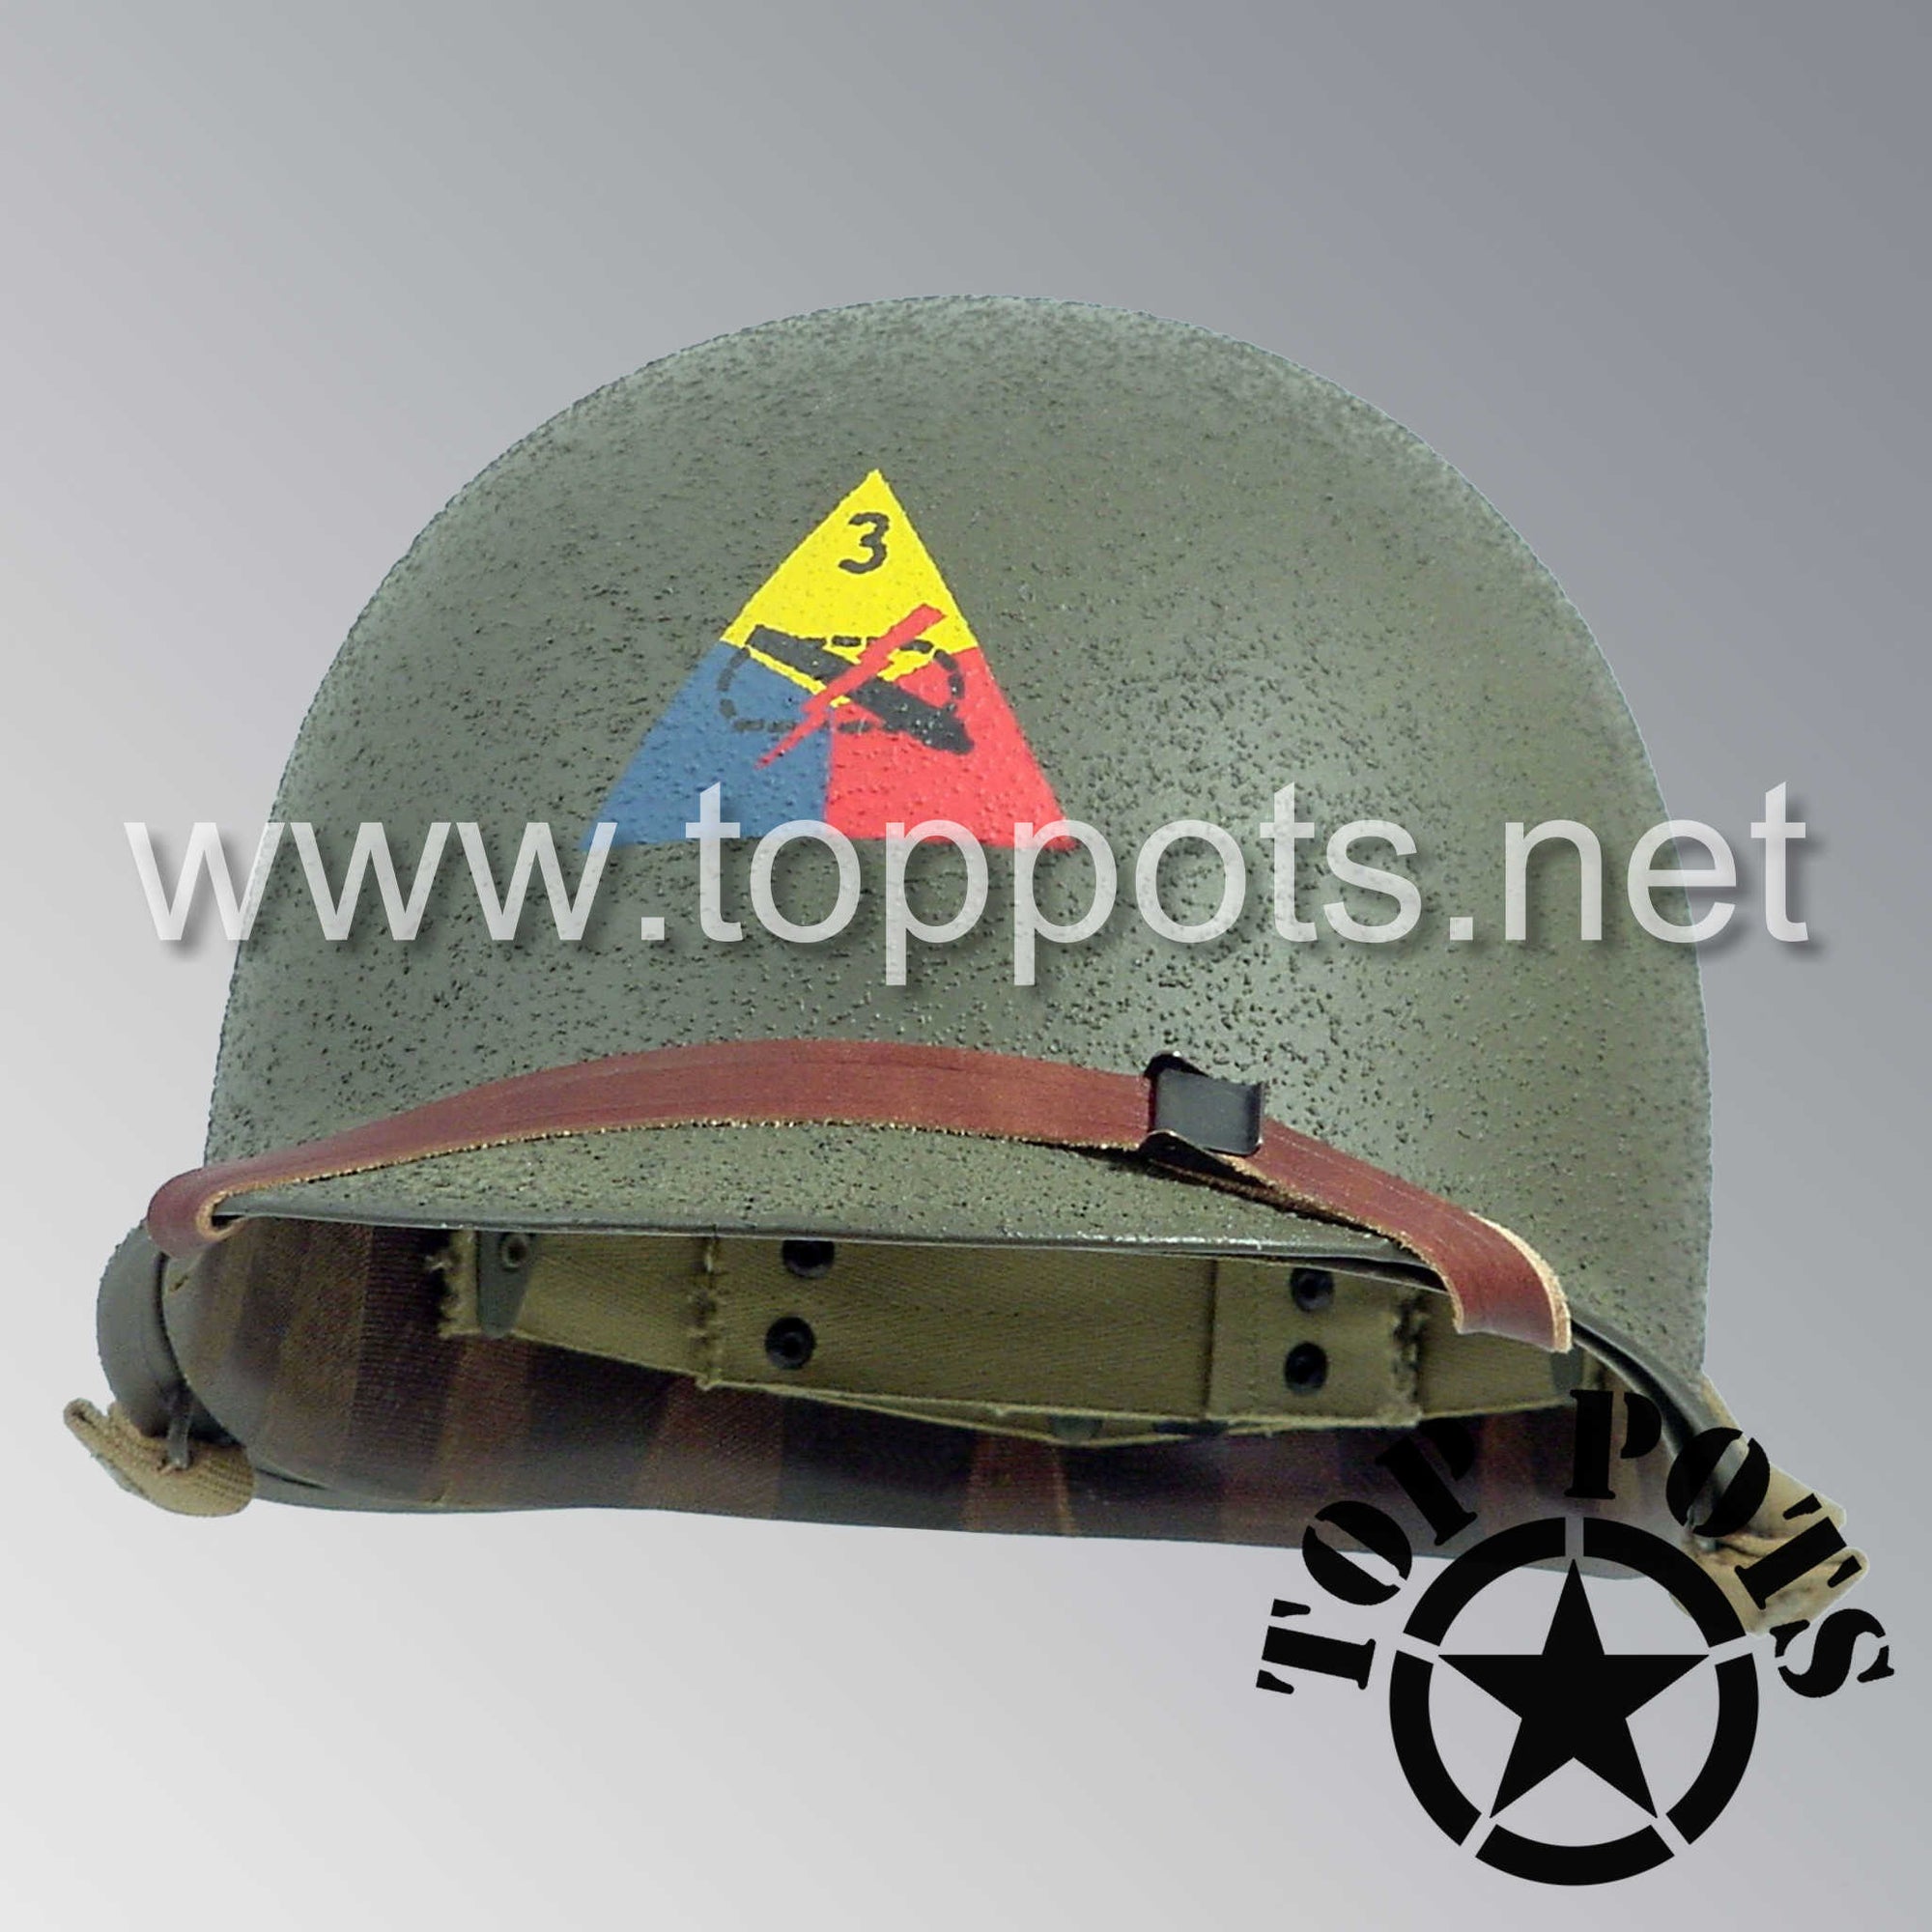 WWII US Army Restored Original M1 Infantry Helmet Swivel Bale Shell and Liner with 3rd Armored Division Emblem